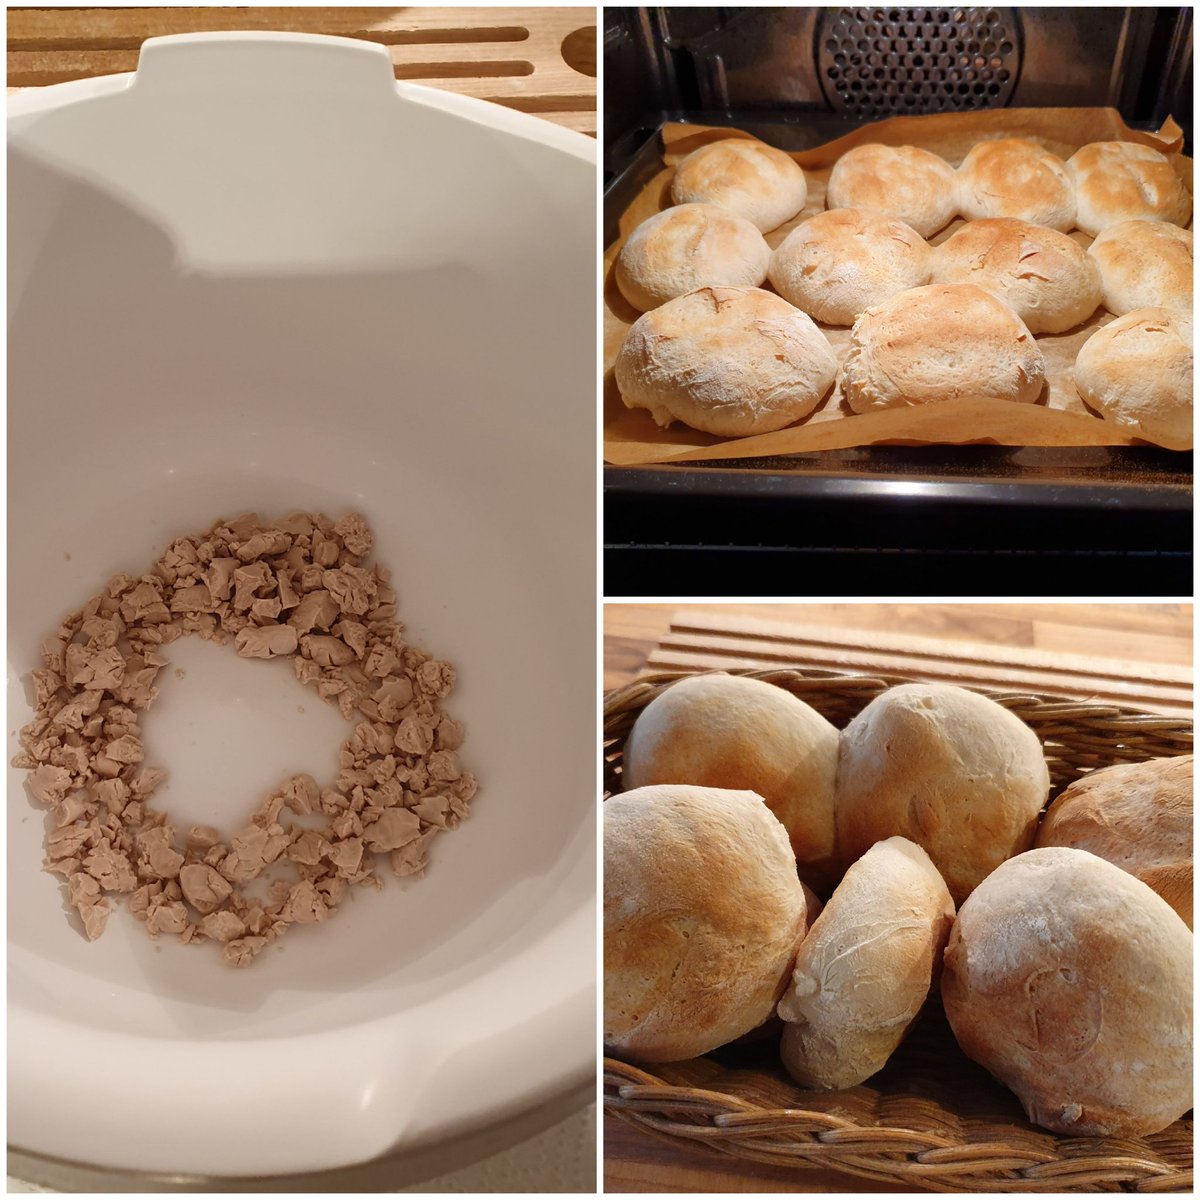 What is your favourite ingredient for your cooking / baking?

Mine is yeast.
I just love the taste, smell and texture. 

Today: freshly baked morning rolls.

#Cooking #Baking #Breakfast #Morning #FreshBreakfast #FreshRolls